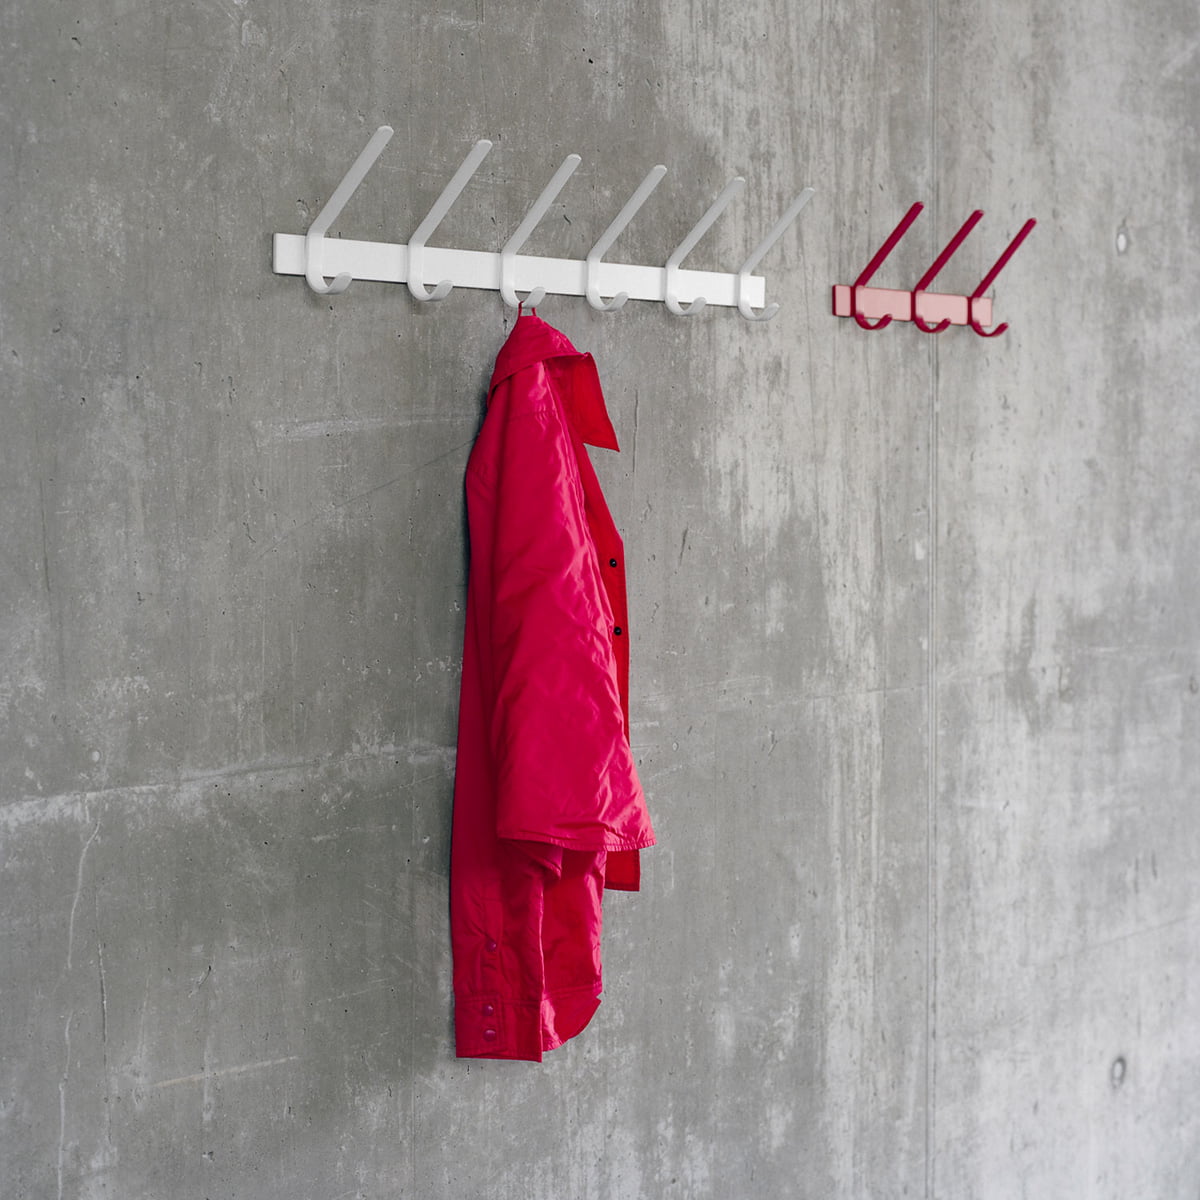 The FK08 Uni coat rack by e15 in our shop